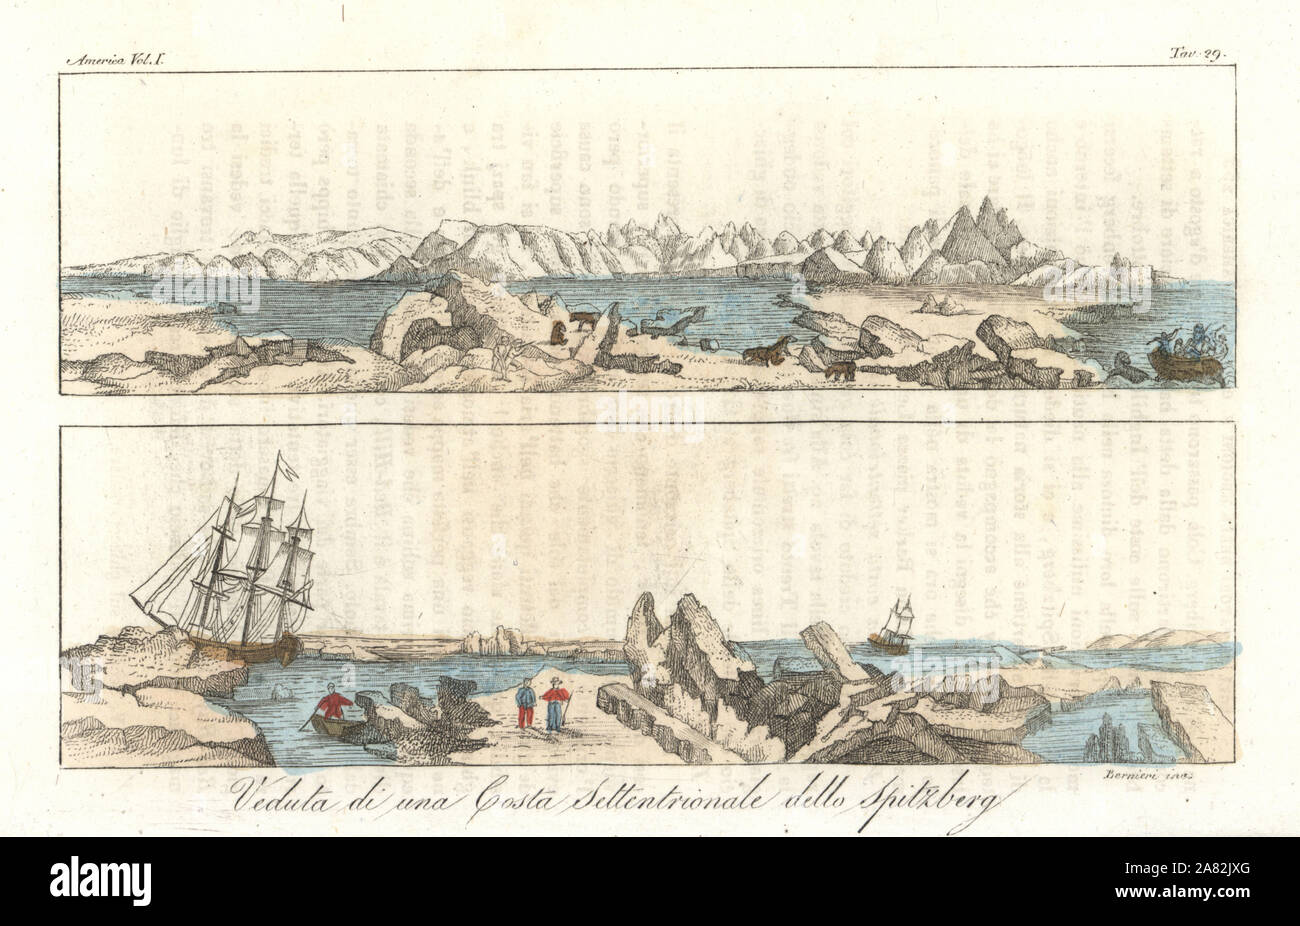 View of the north coast of Spitsbergen island, Norway, early 19th century. Handcoloured copperplate engraving by Bernieri from Giulio Ferrario's Ancient and Modern Costumes of all the Peoples of the World, Florence, Italy, 1837. Stock Photo